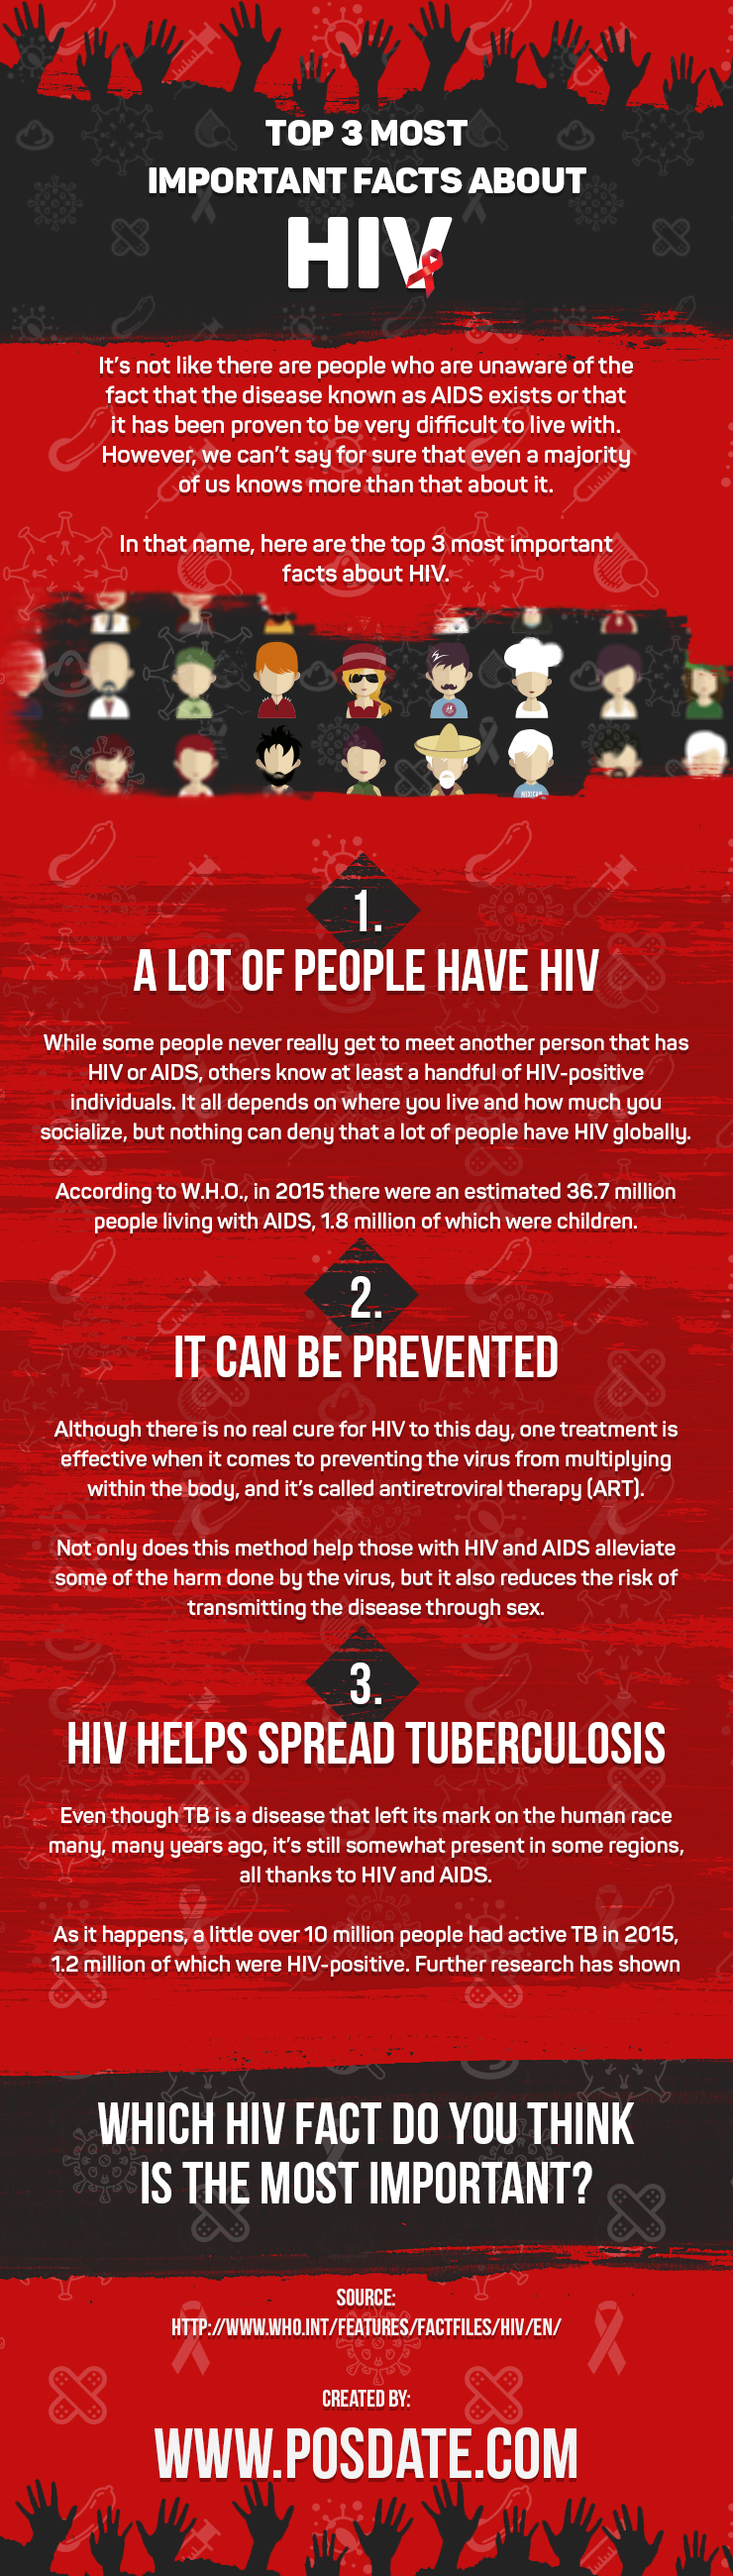 Top 3 Most Important Facts about HIV